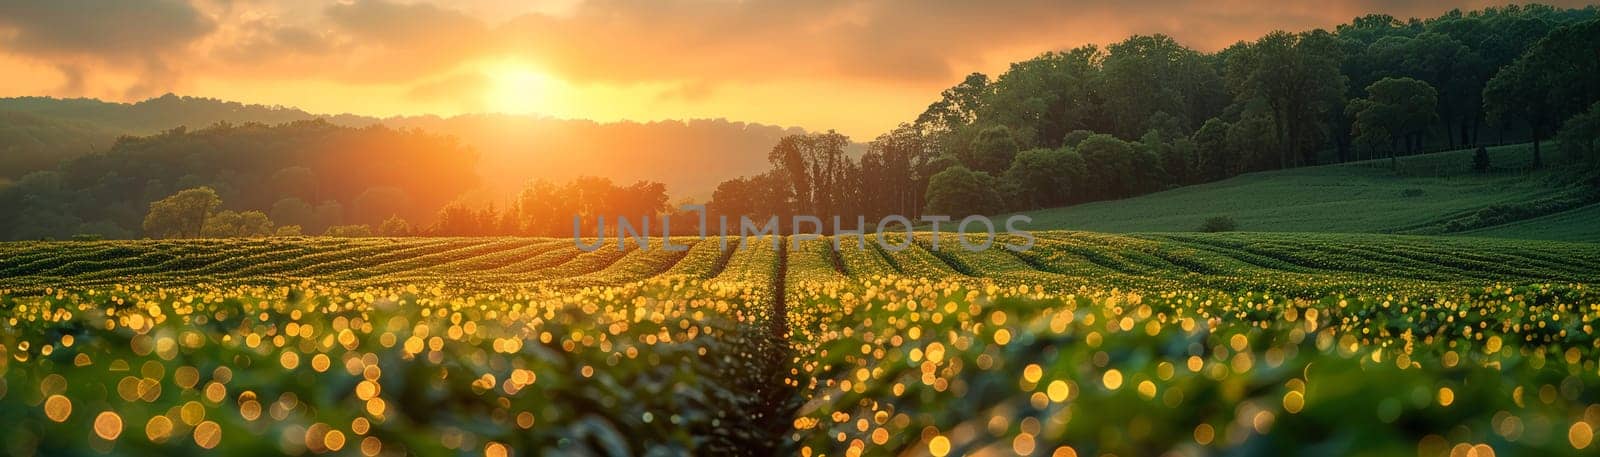 Morning Dew on Fresh Organic Farmland at Sunrise, A serene, blurred landscape of sprawling farmland signifies a new day in sustainable agriculture.